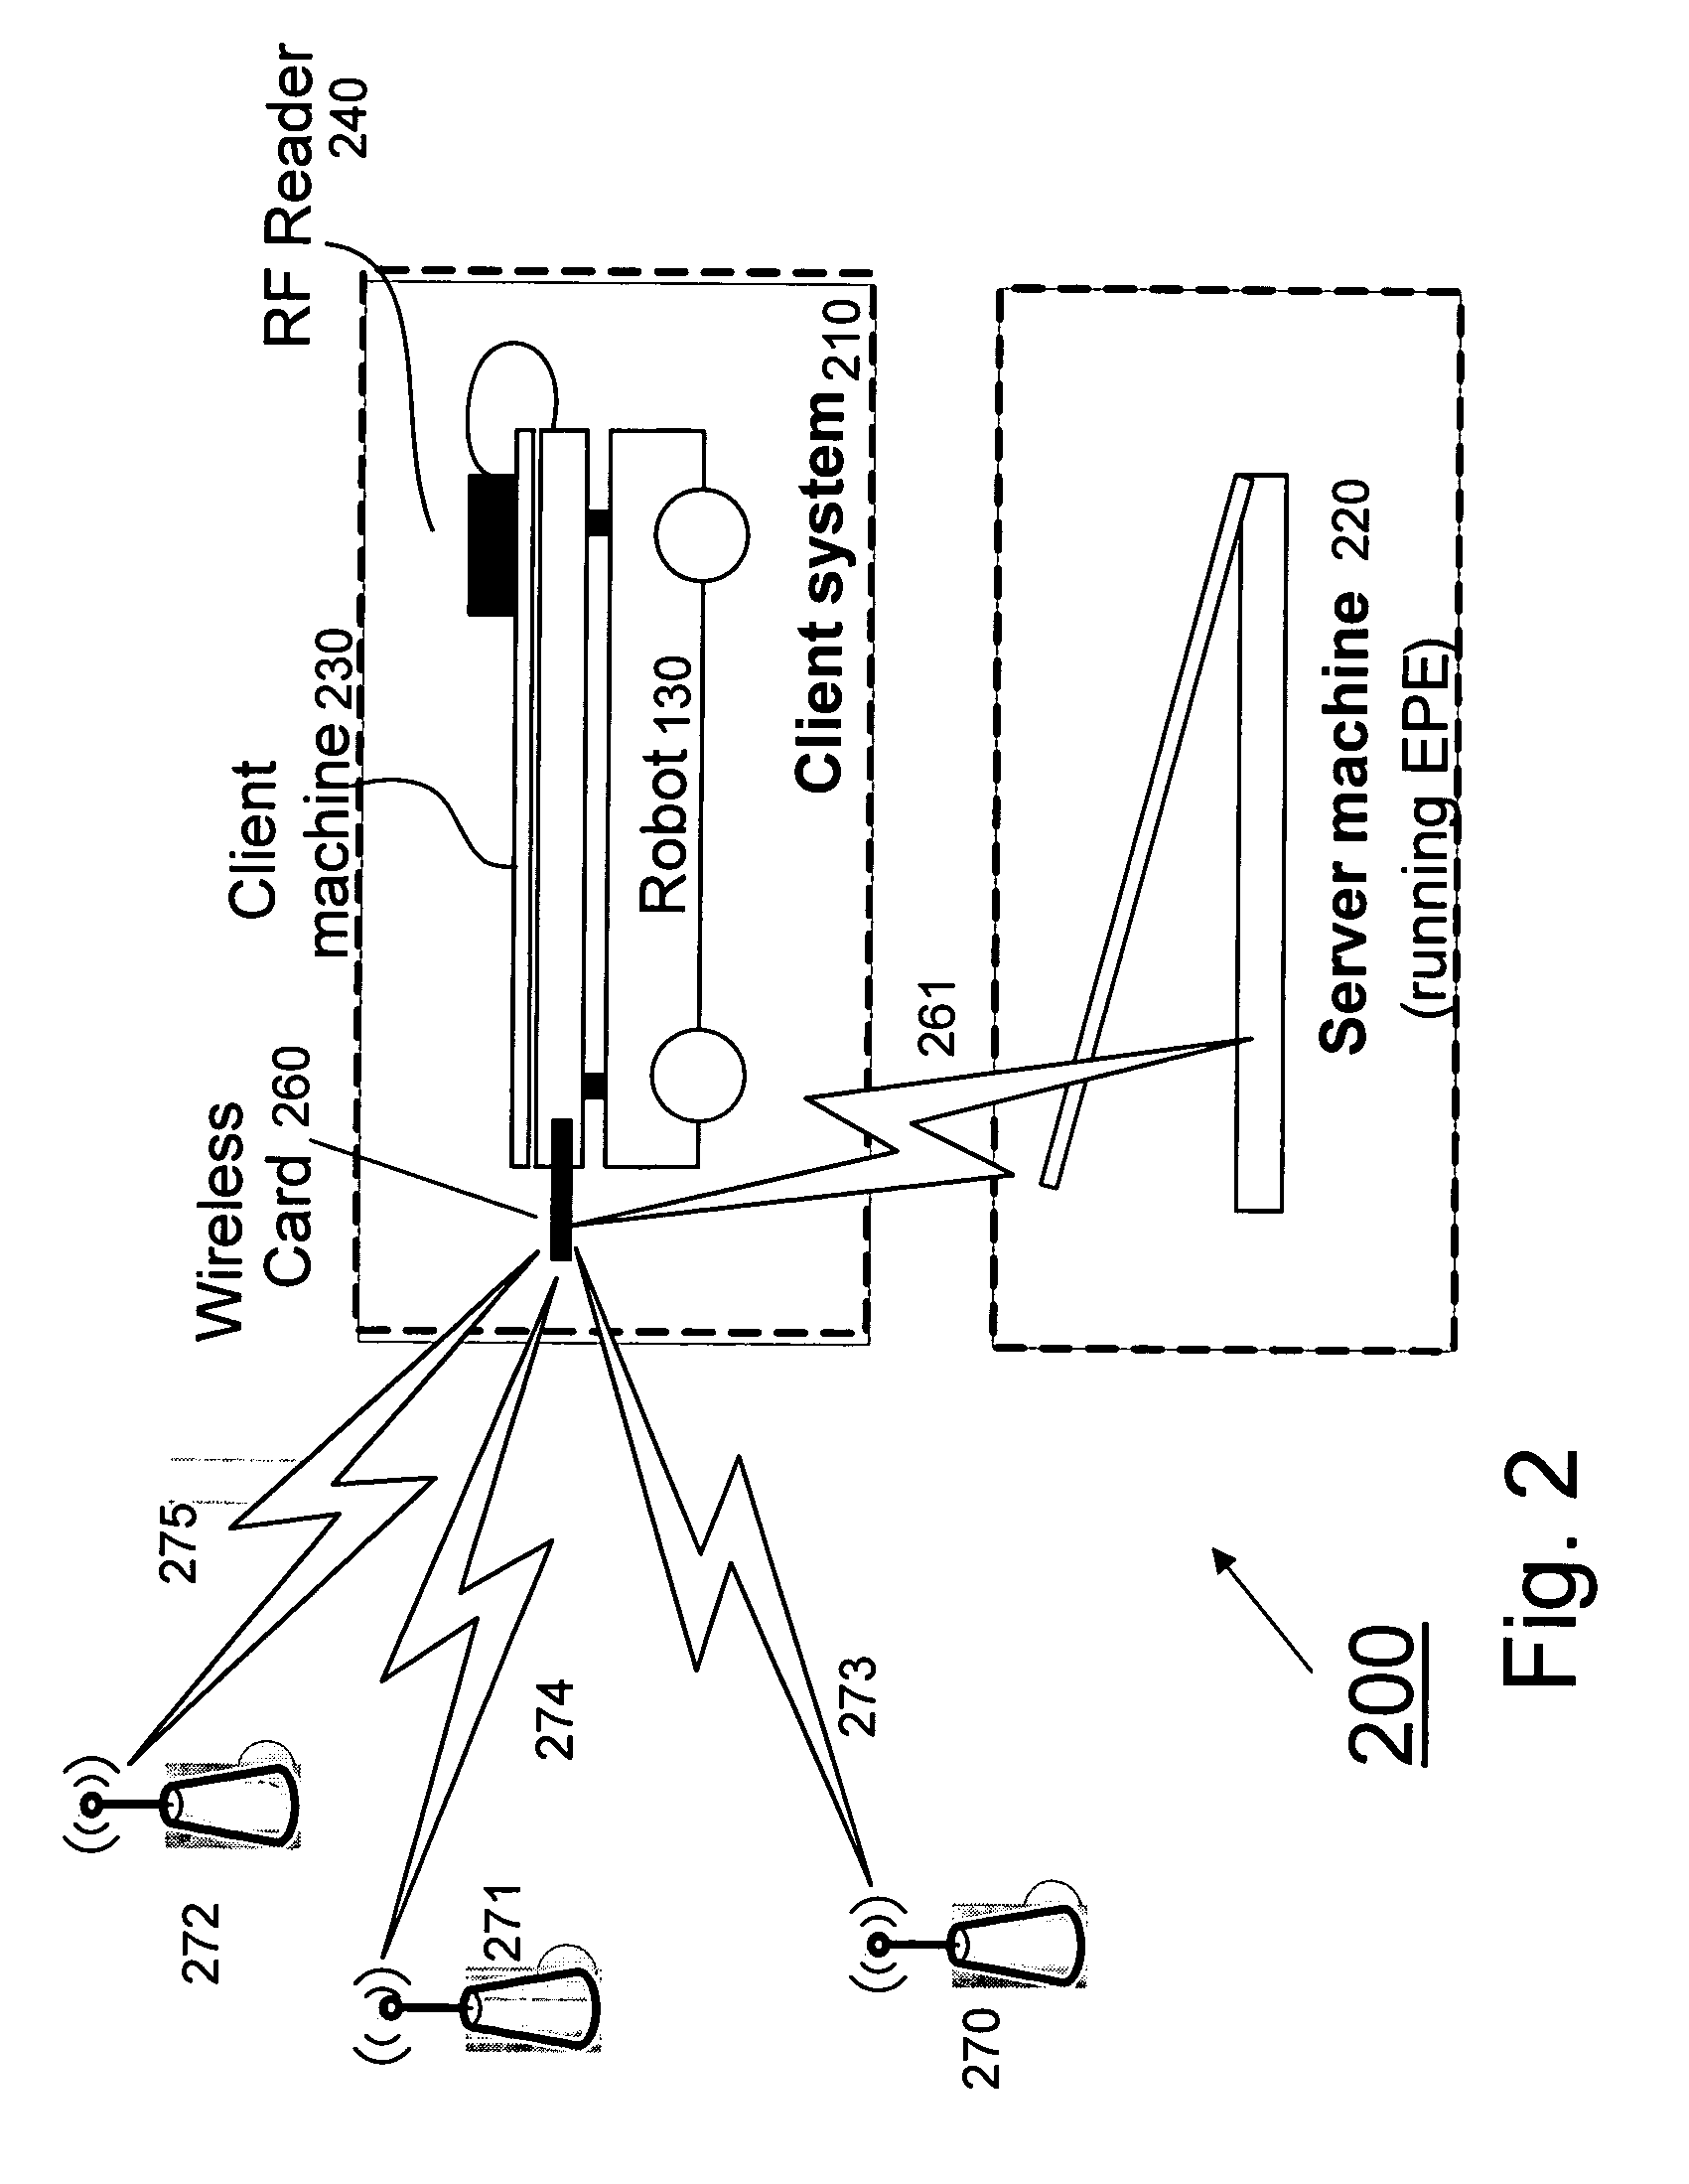 Method and system for autonomous correlation of sensed environmental attributes with entities